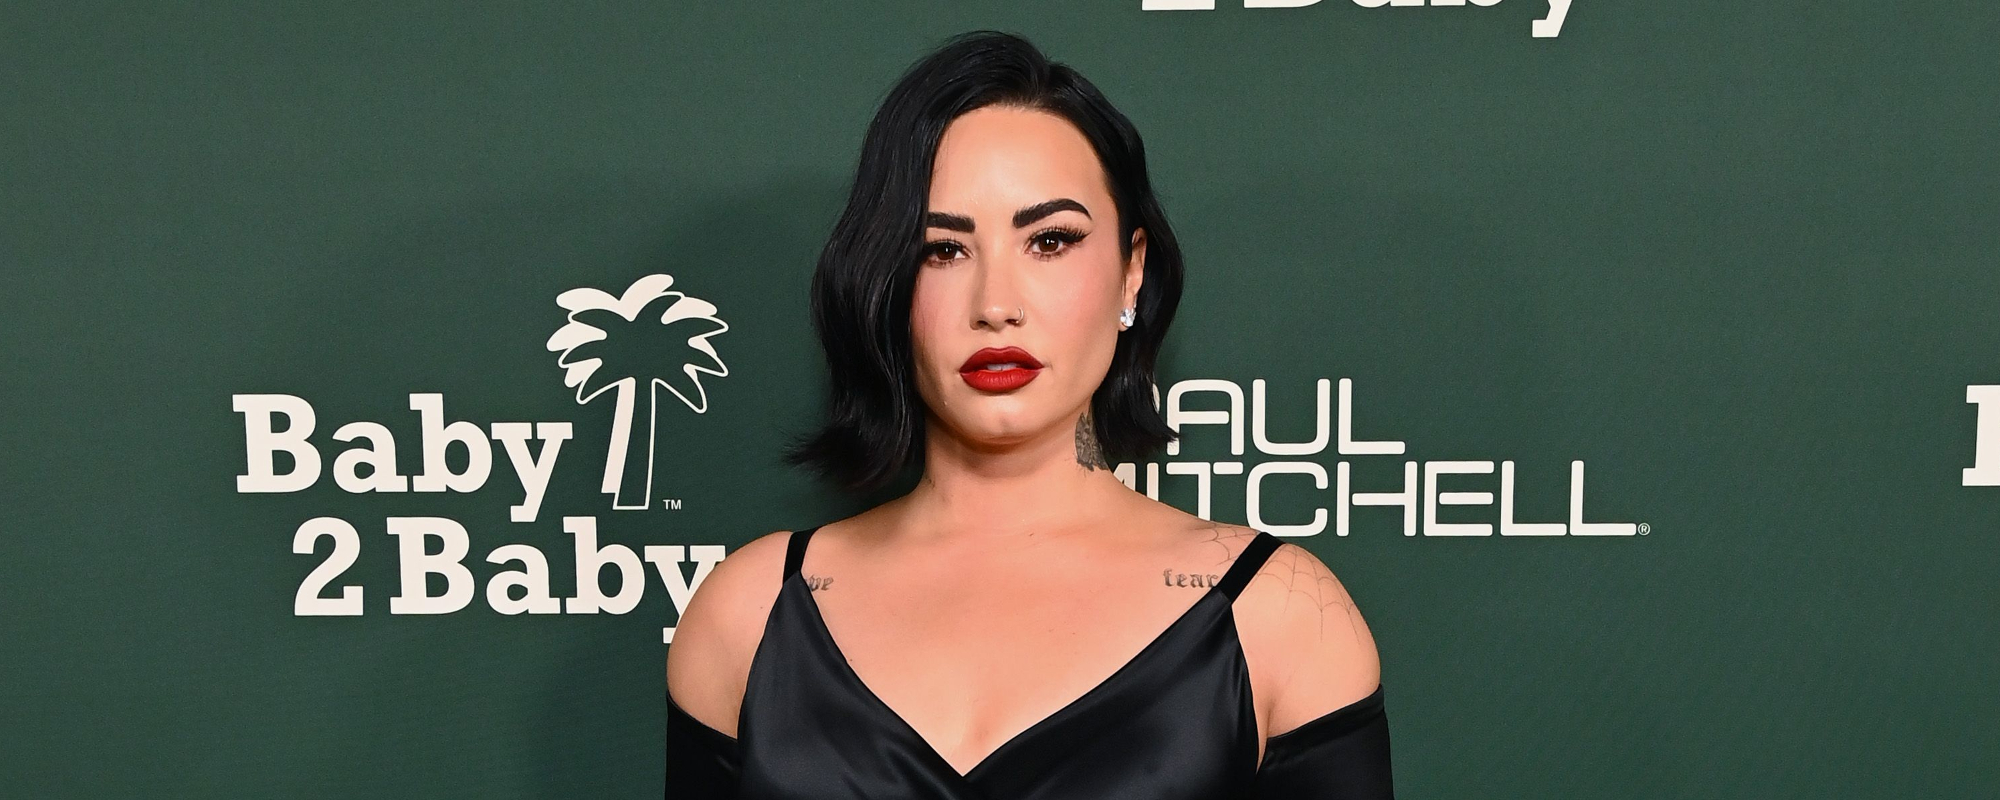 Demi Lovato Shares How Taylor Swift Helped Calm Her Nerves During “Nervous” MTV VMAs Performance